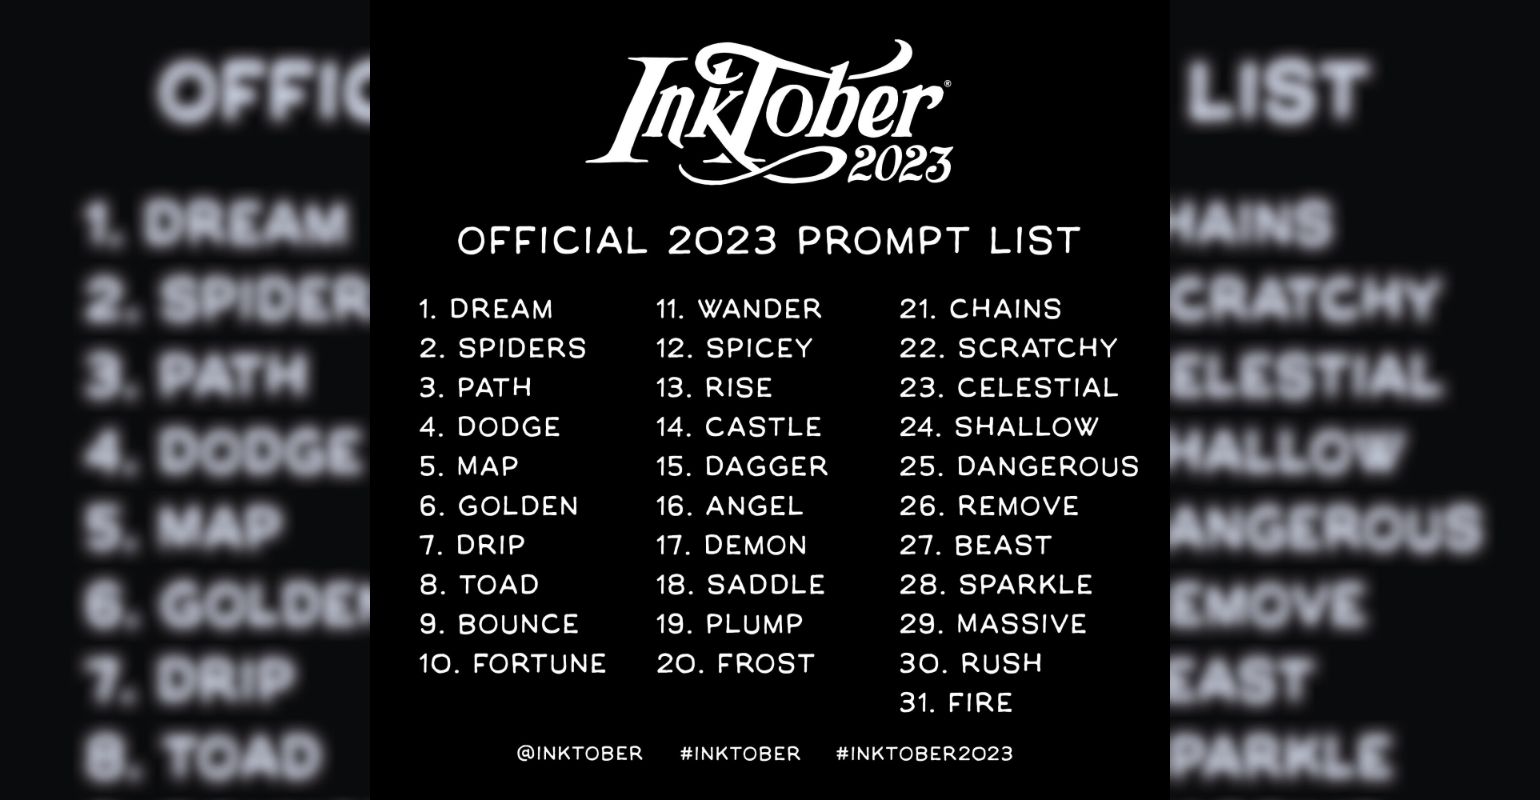 Inktober 2023 and Prompts